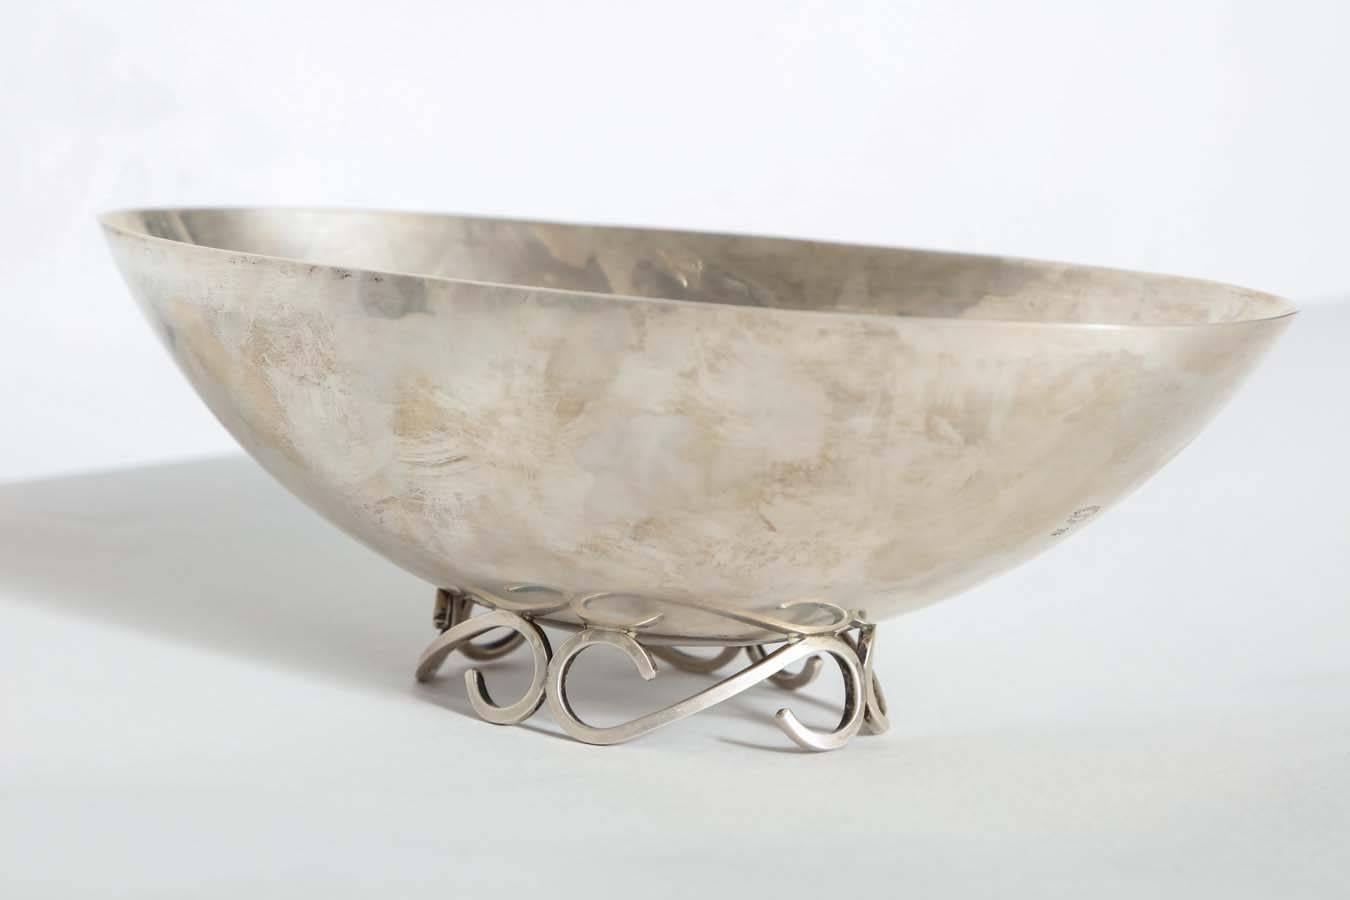 A fabulous Mid-Century Modernist bowl by Sciarotta with early mark on stylized foot.